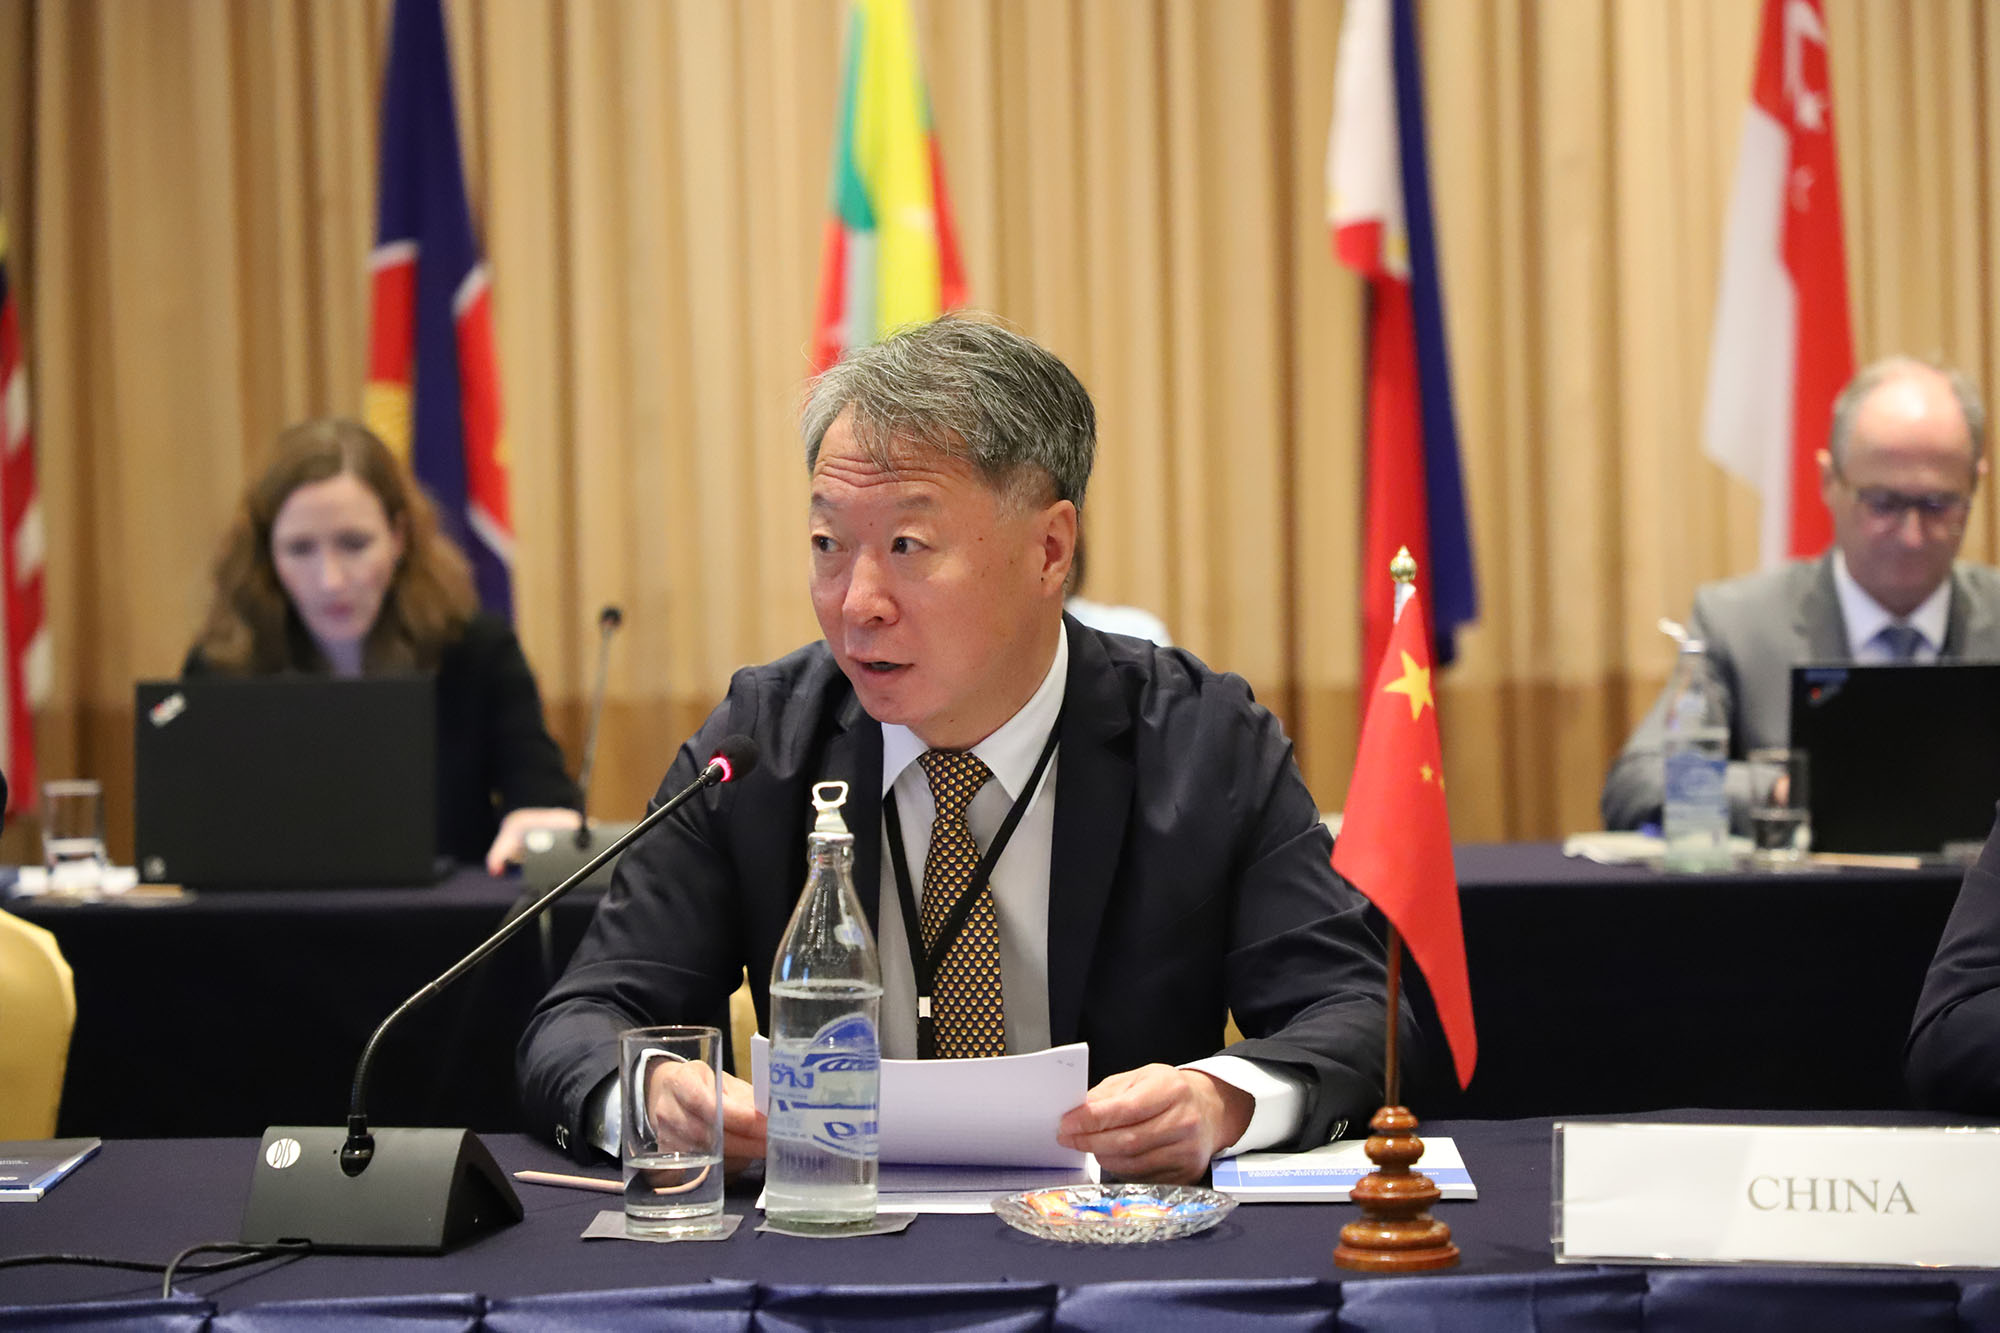 Director General Yin Guohai of the Criminal Investigation Division of the Ministry of Public Security of China discusses ongoing operations and the need for a regional plan of action.